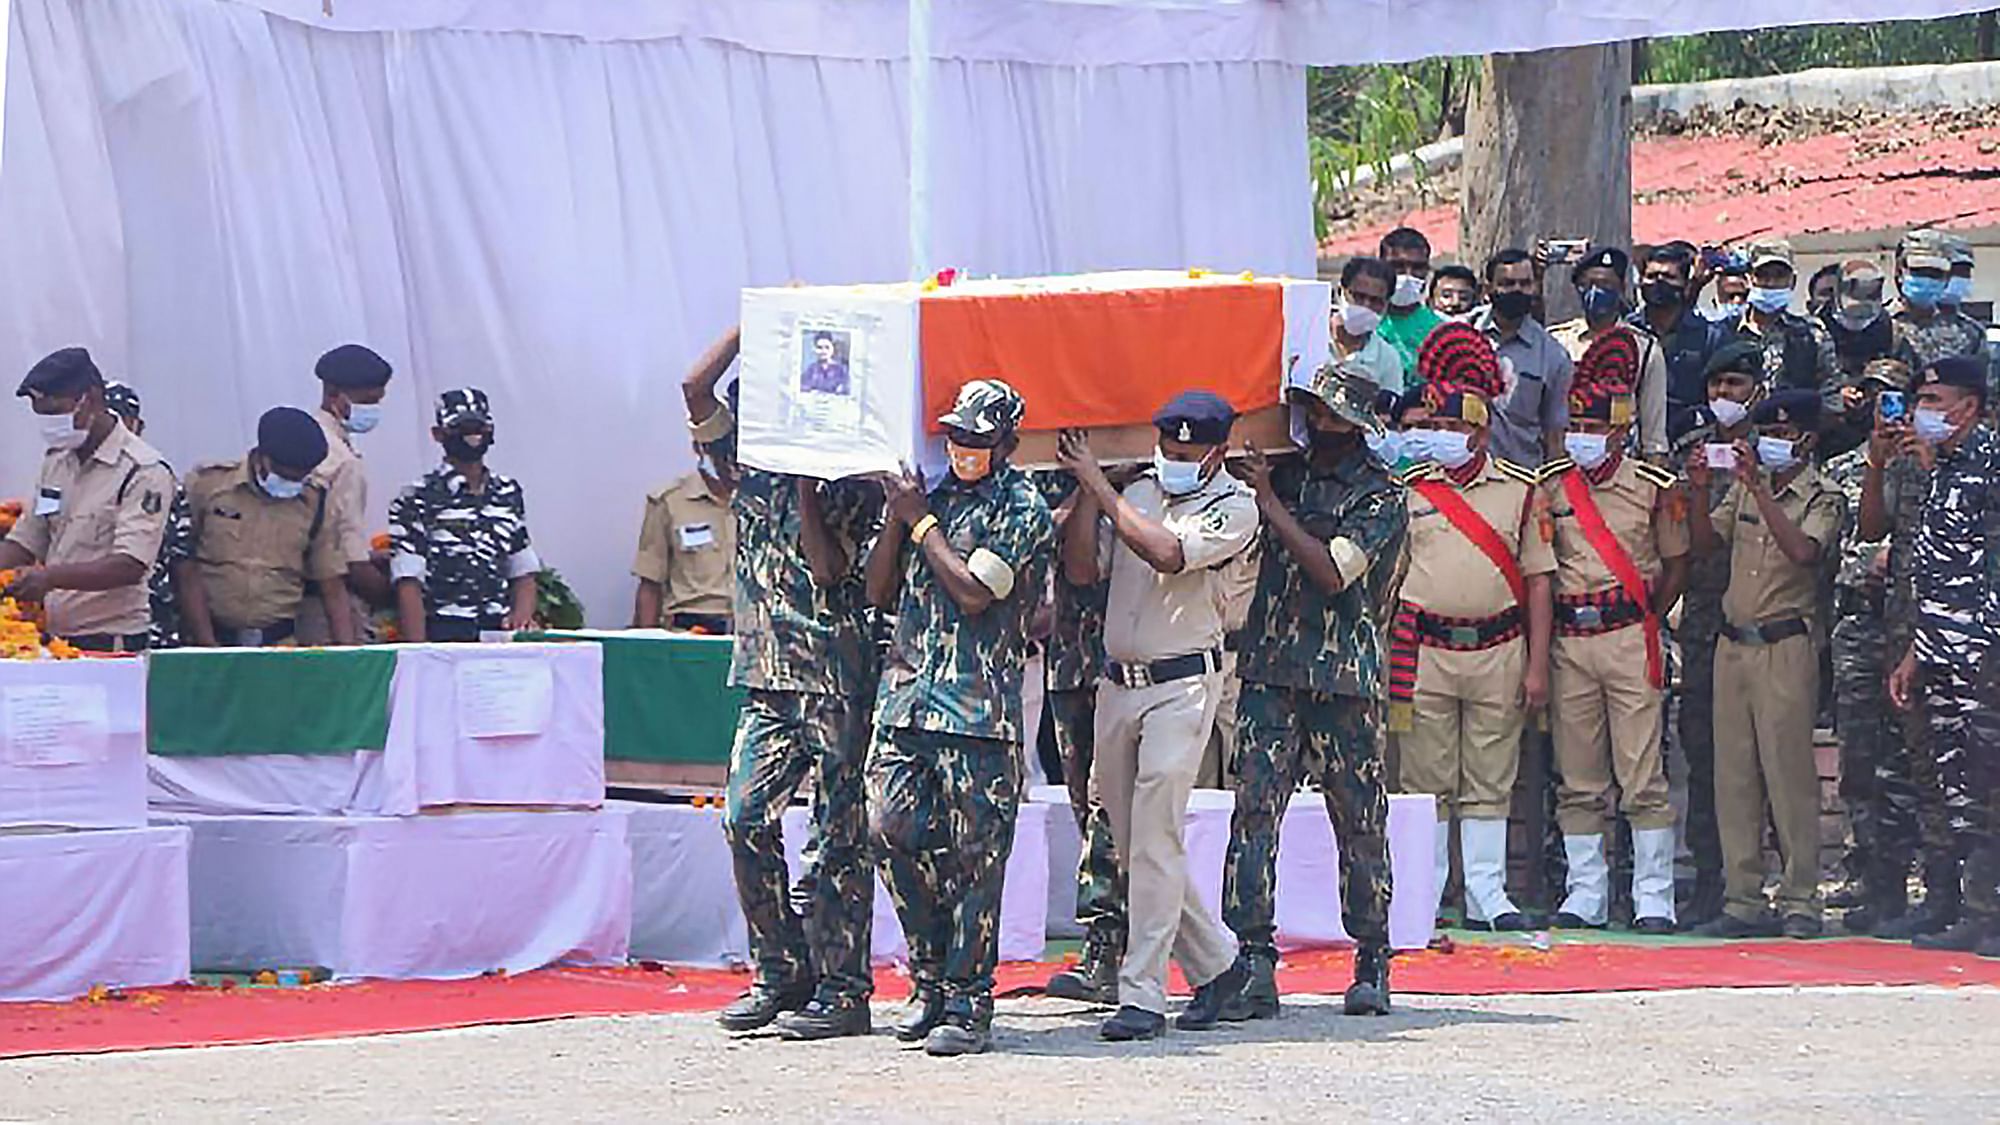 Army personnel pay tribute to the soldiers who were martyred in the Bijapur Naxalite incident.